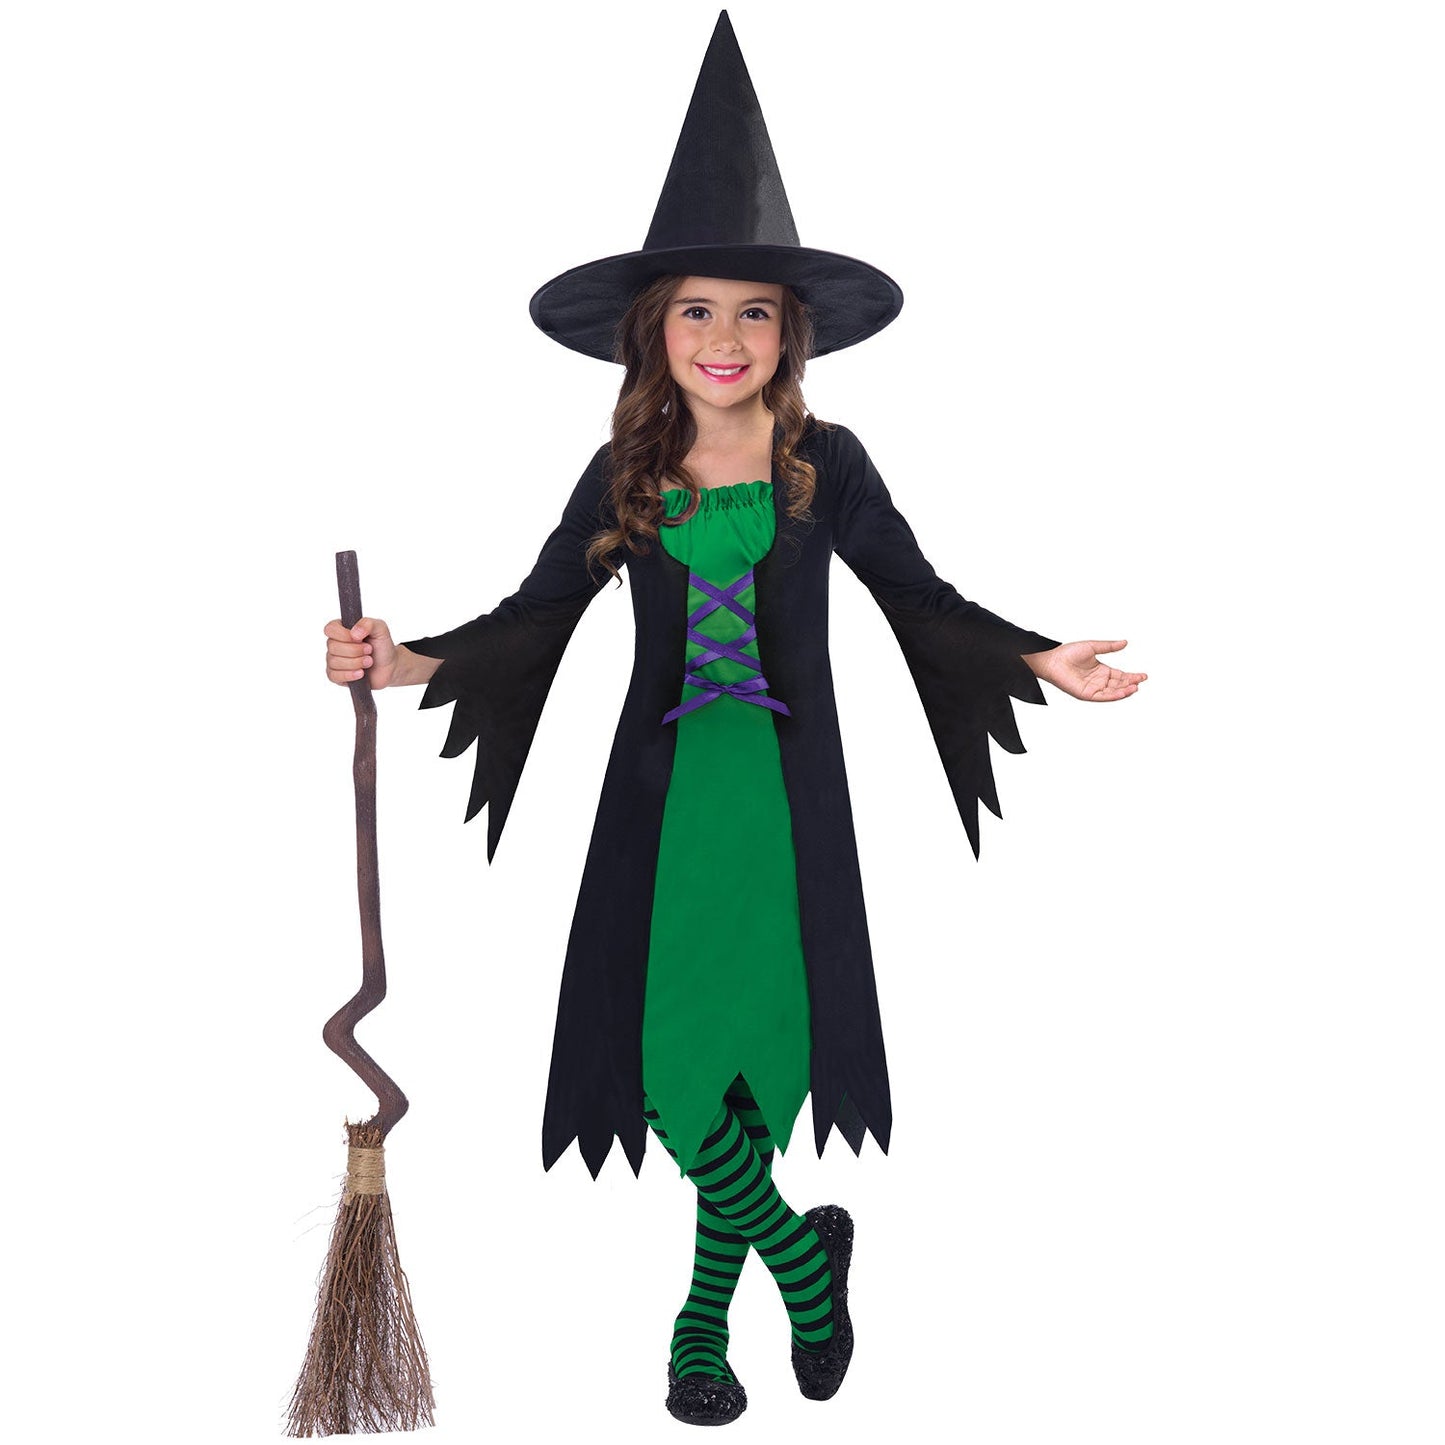 Green Wicked Witch Costume includes dress and hat